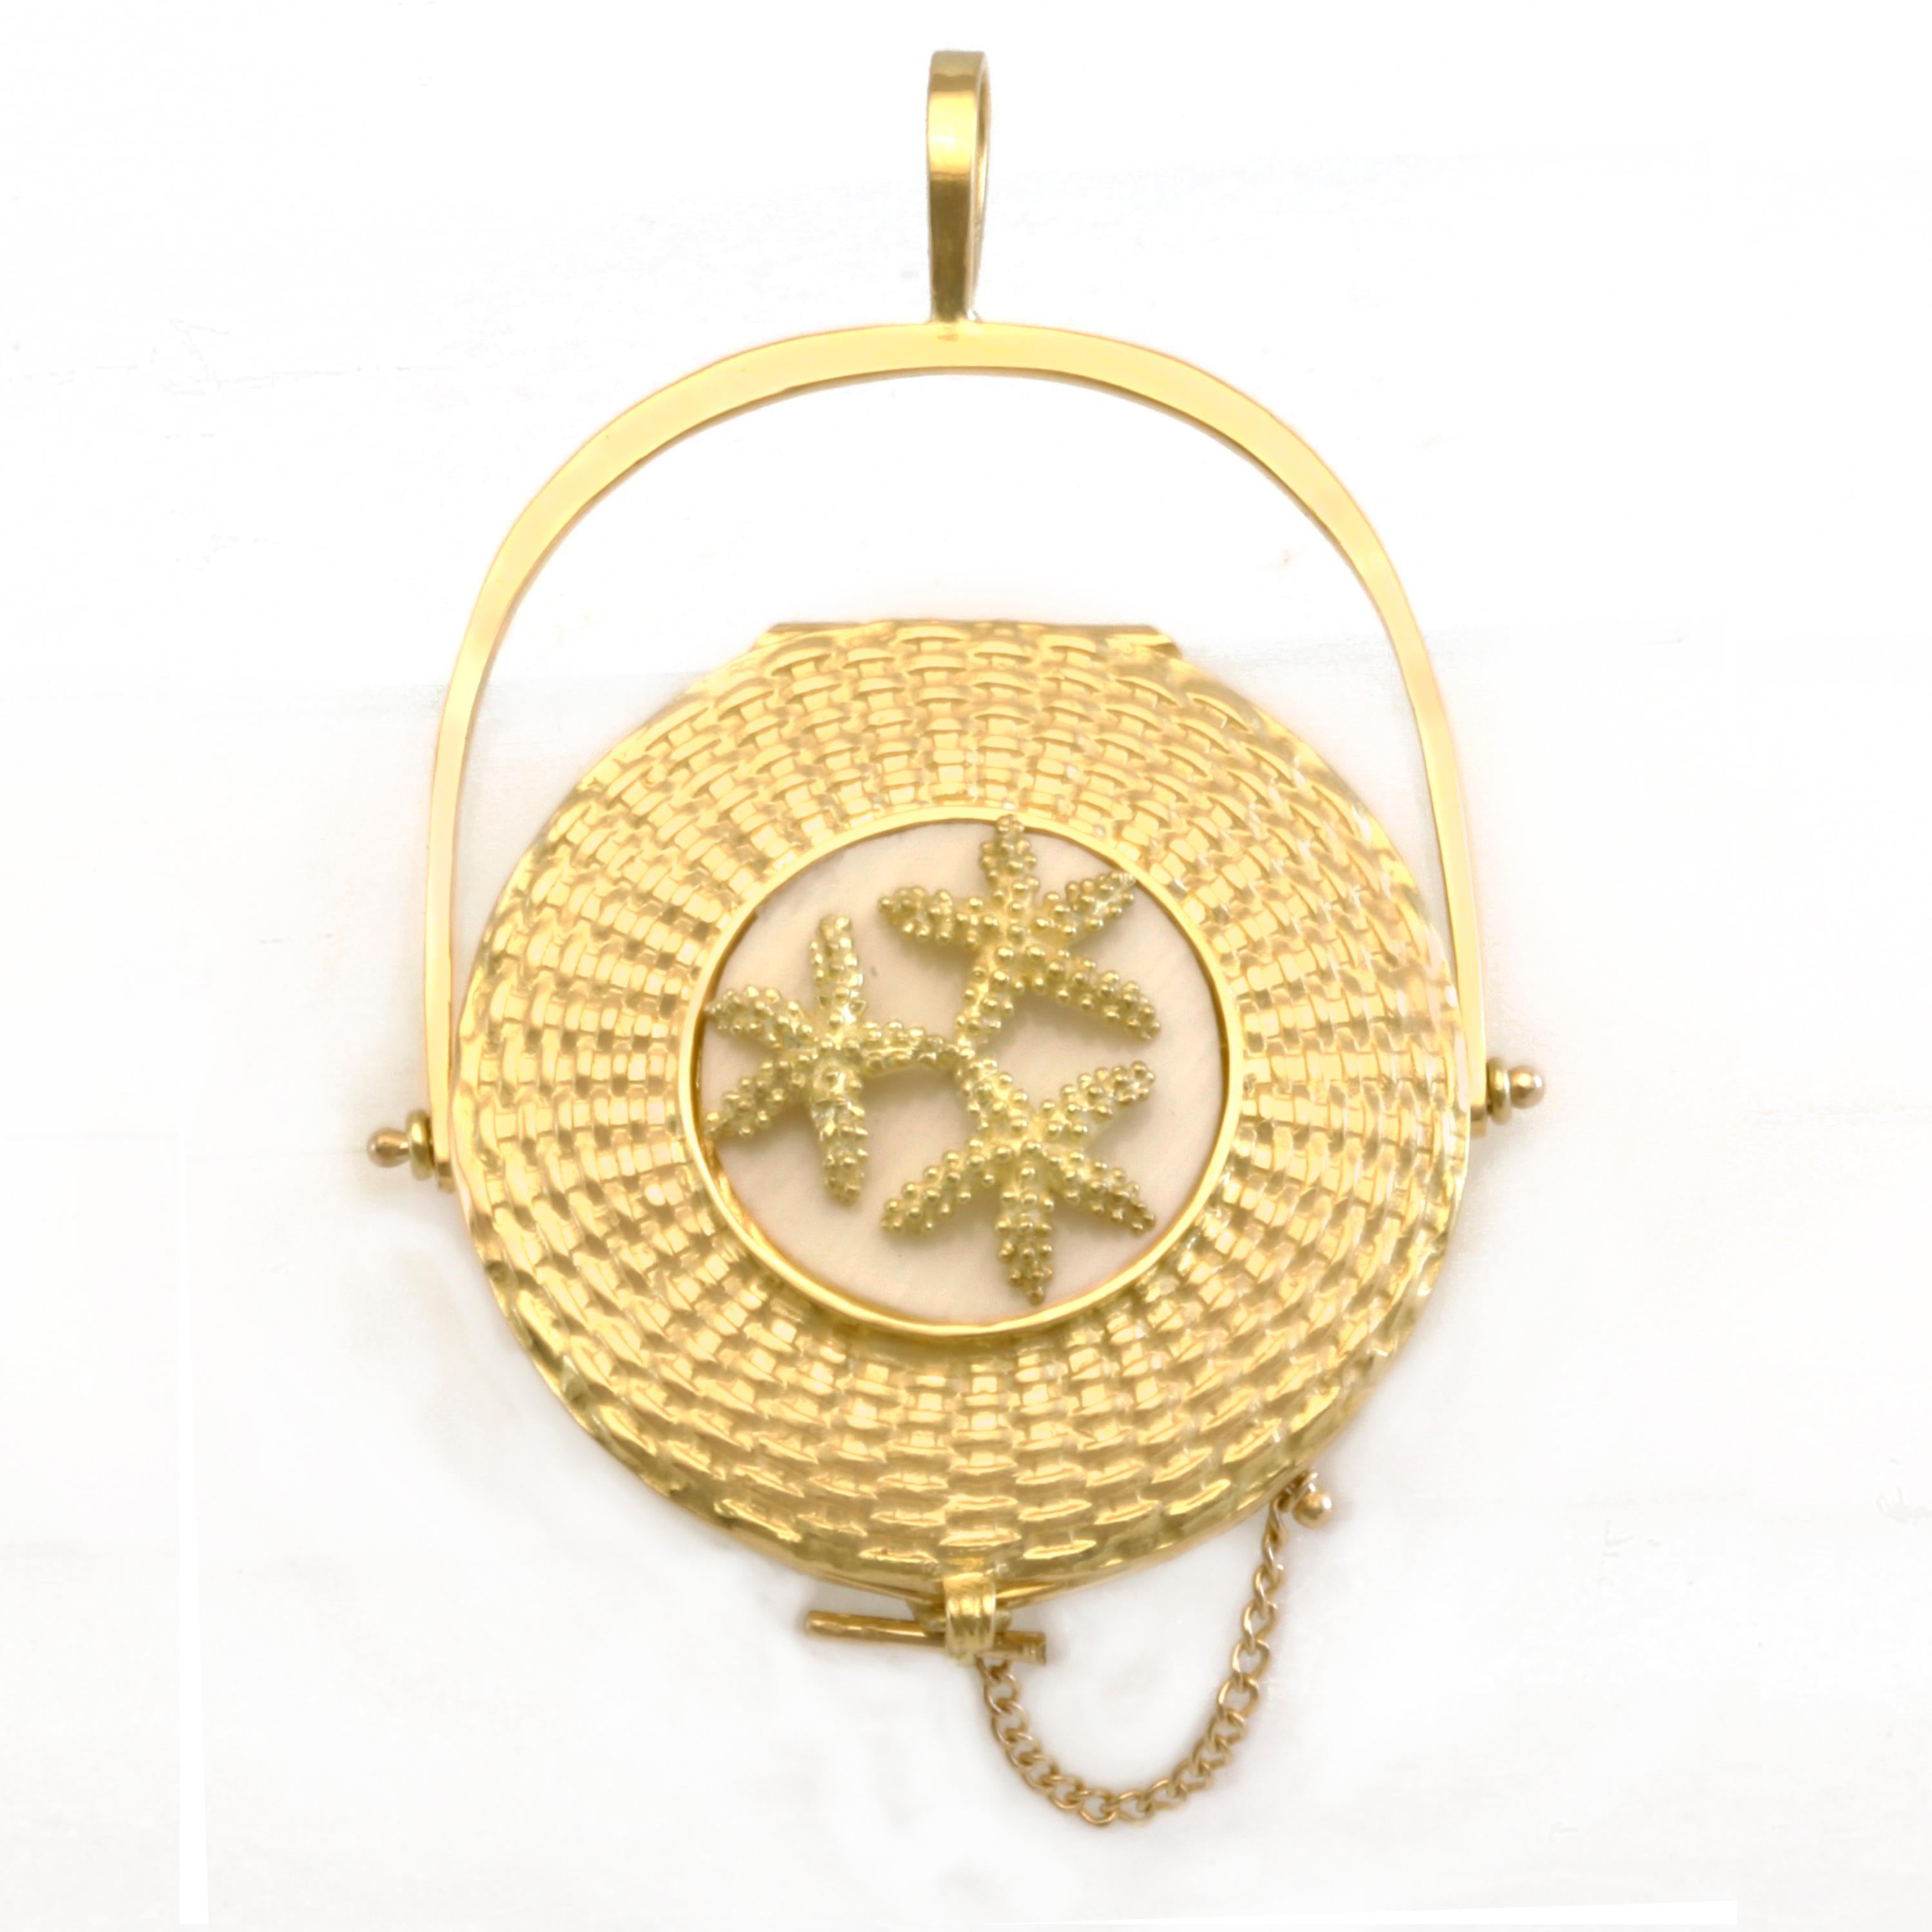  Lockets in traditional and contemporary shapes of the  Nantucket Lightship Basket are originals woven by hand and formed by lost wax casting, This locket is named after a cottage on the eastern end of Nantucket Island called Siasconset. Diana Kim